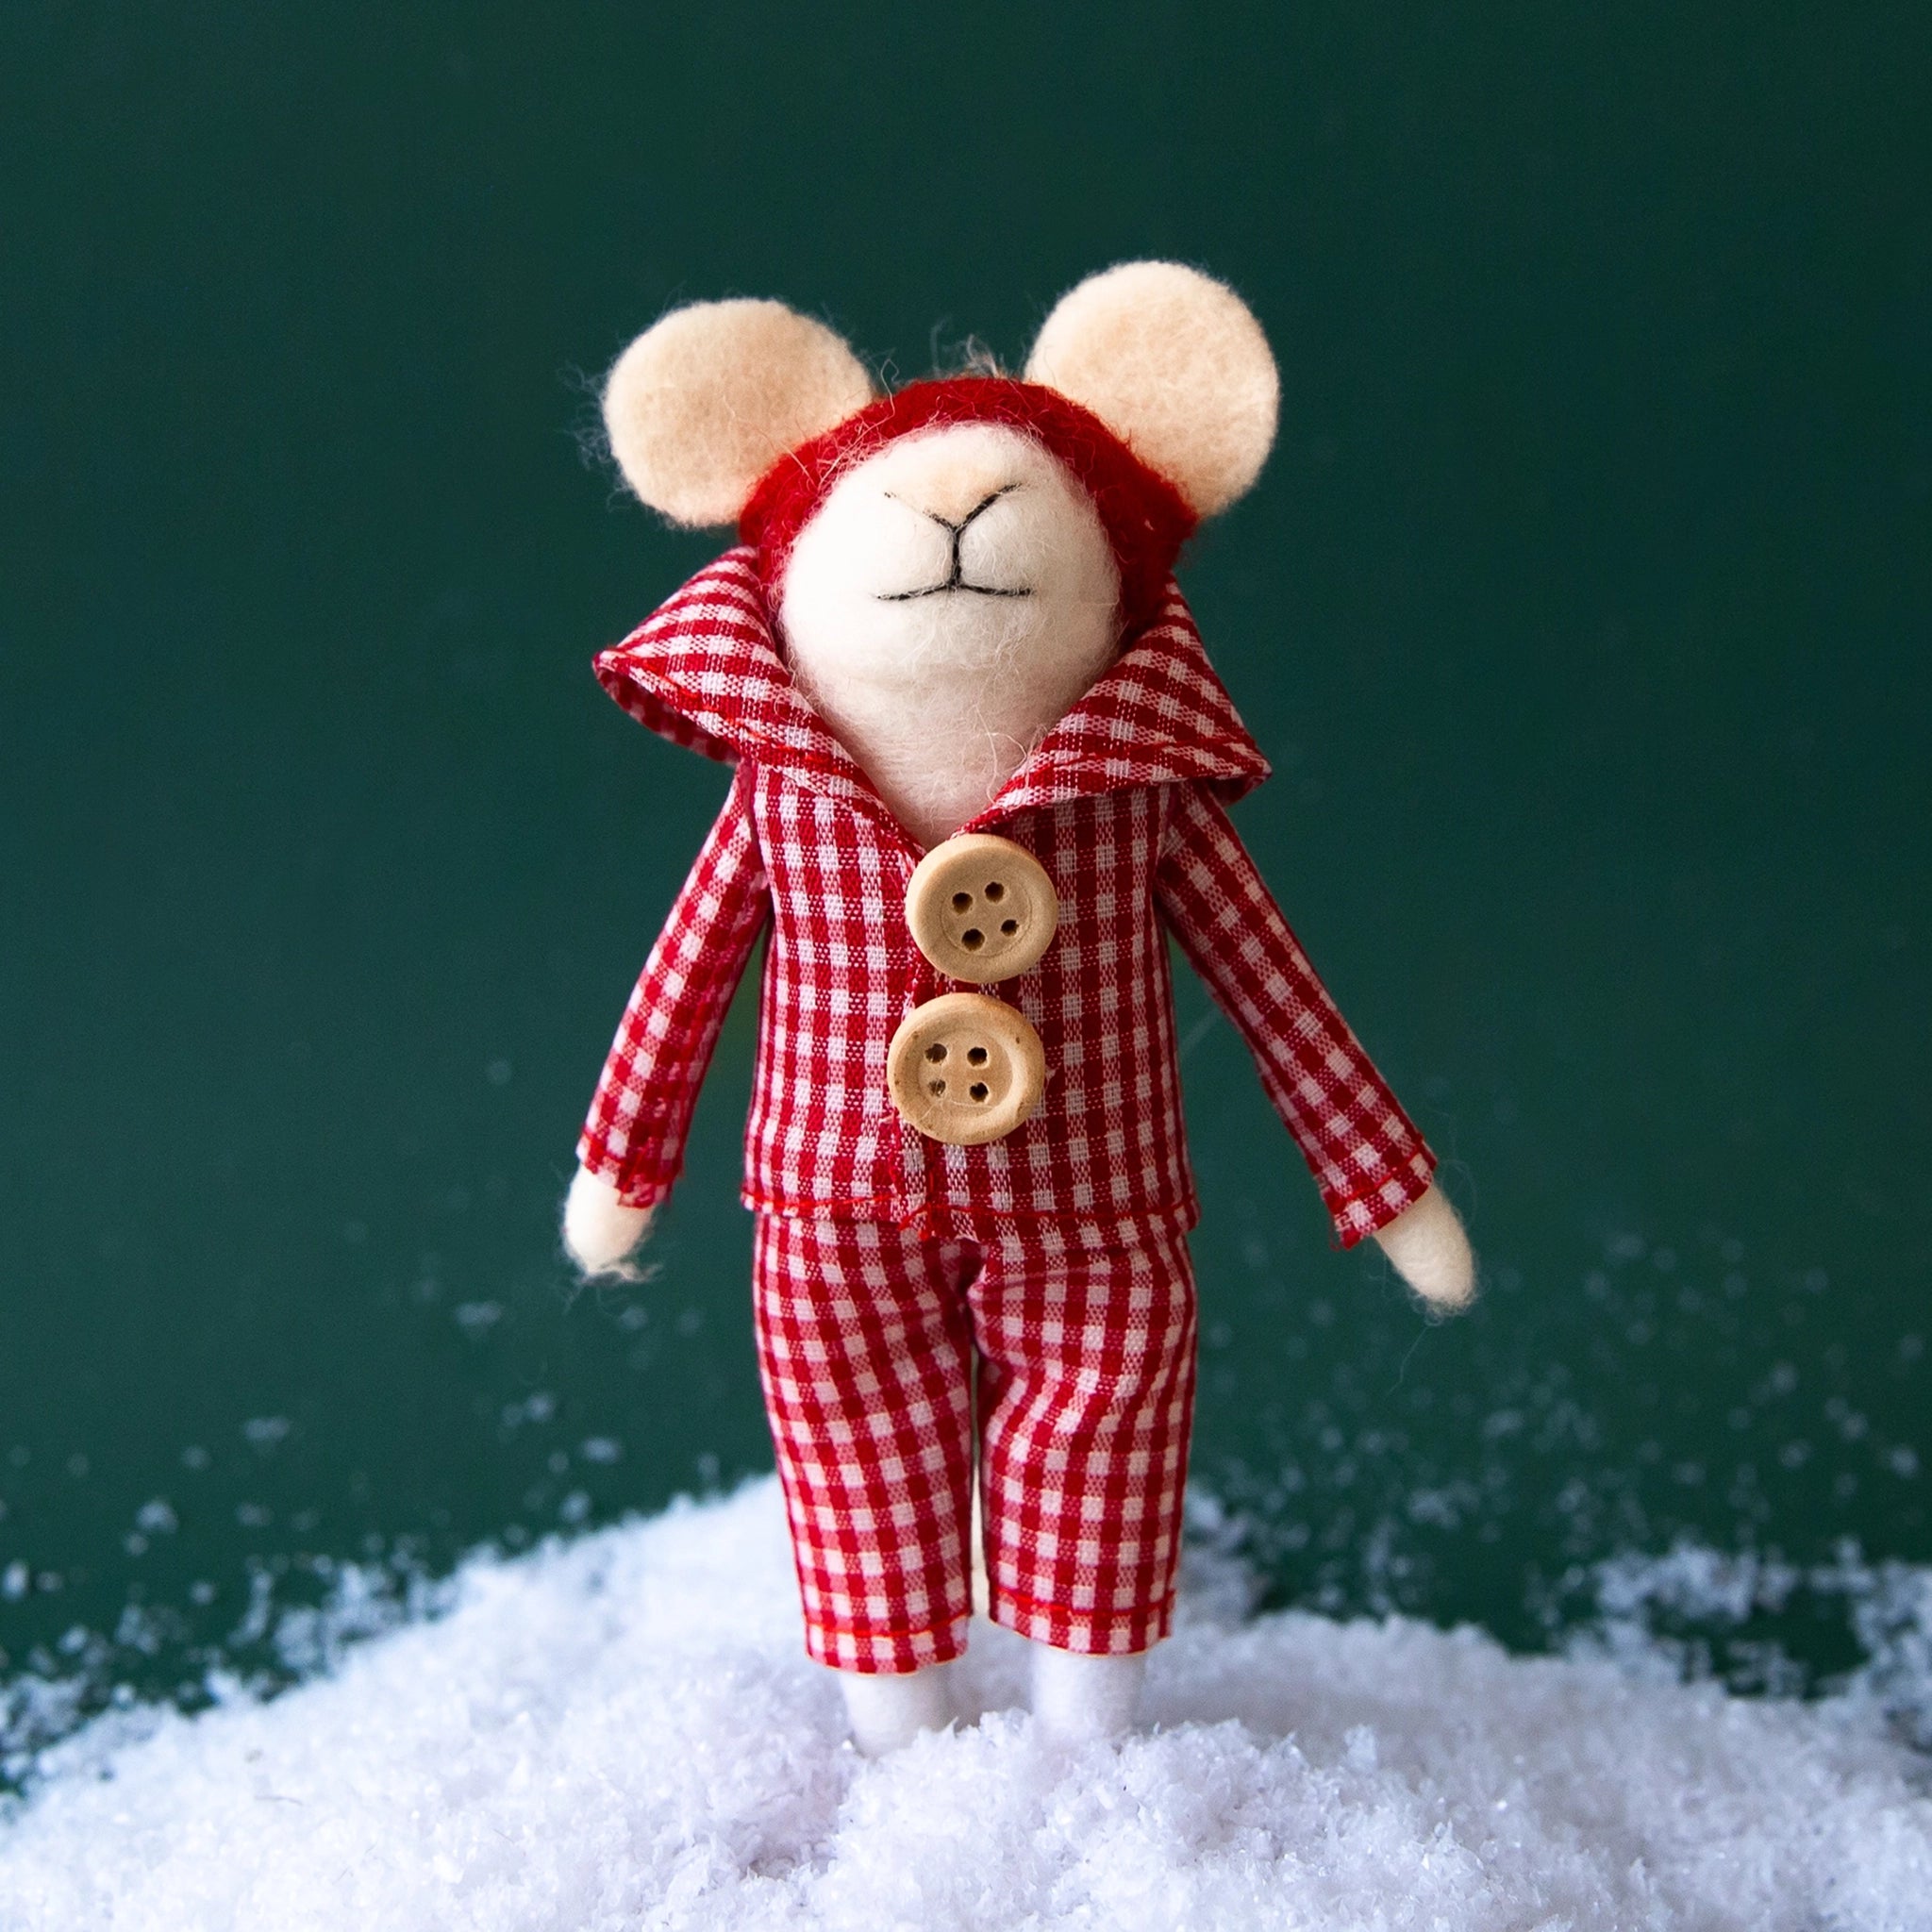 On a green snowy background is a white mouse felt ornament with a red and white gingham outfit.